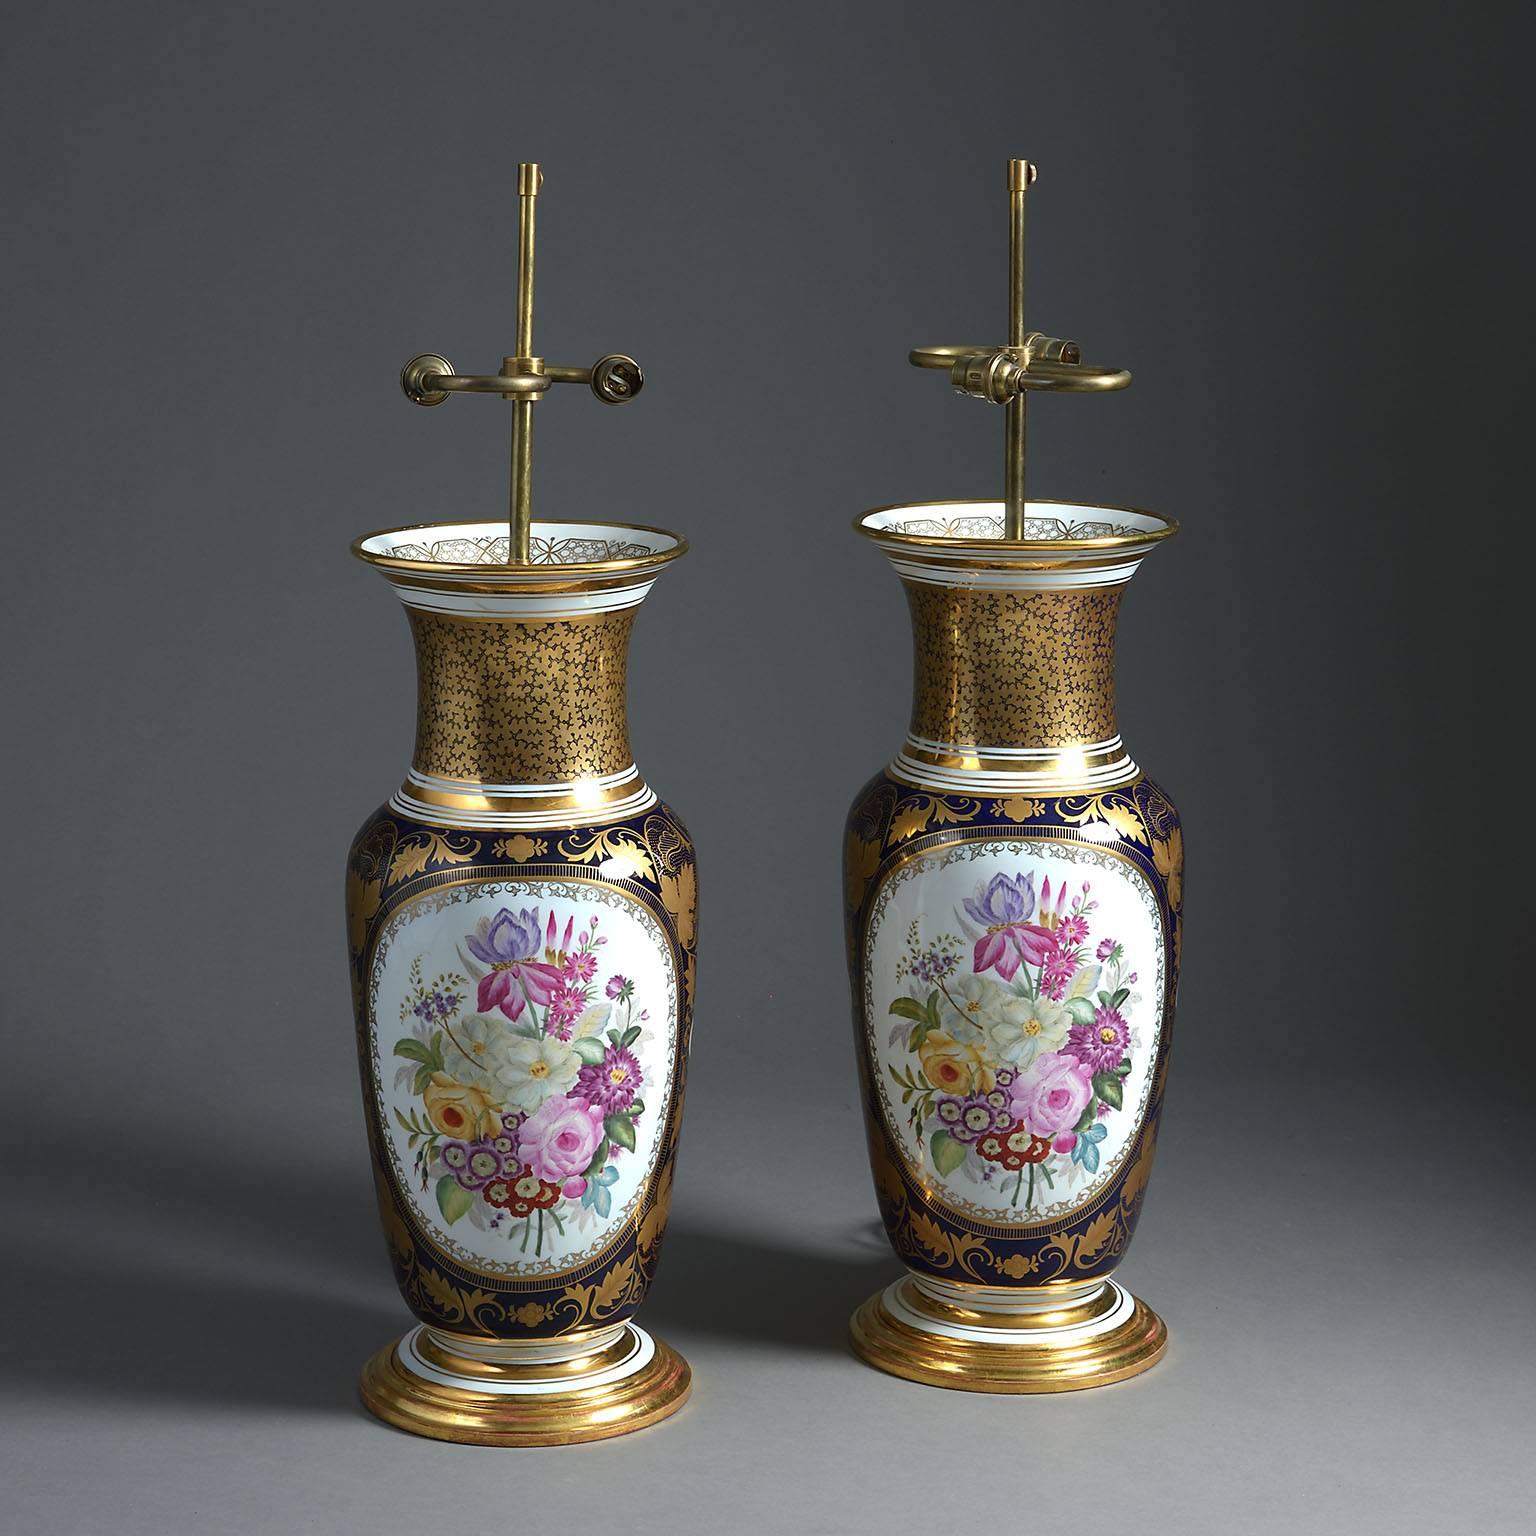 Pair of Large Paris Porcelain Vases with Floral Panels Mounted as Lamps For Sale 1